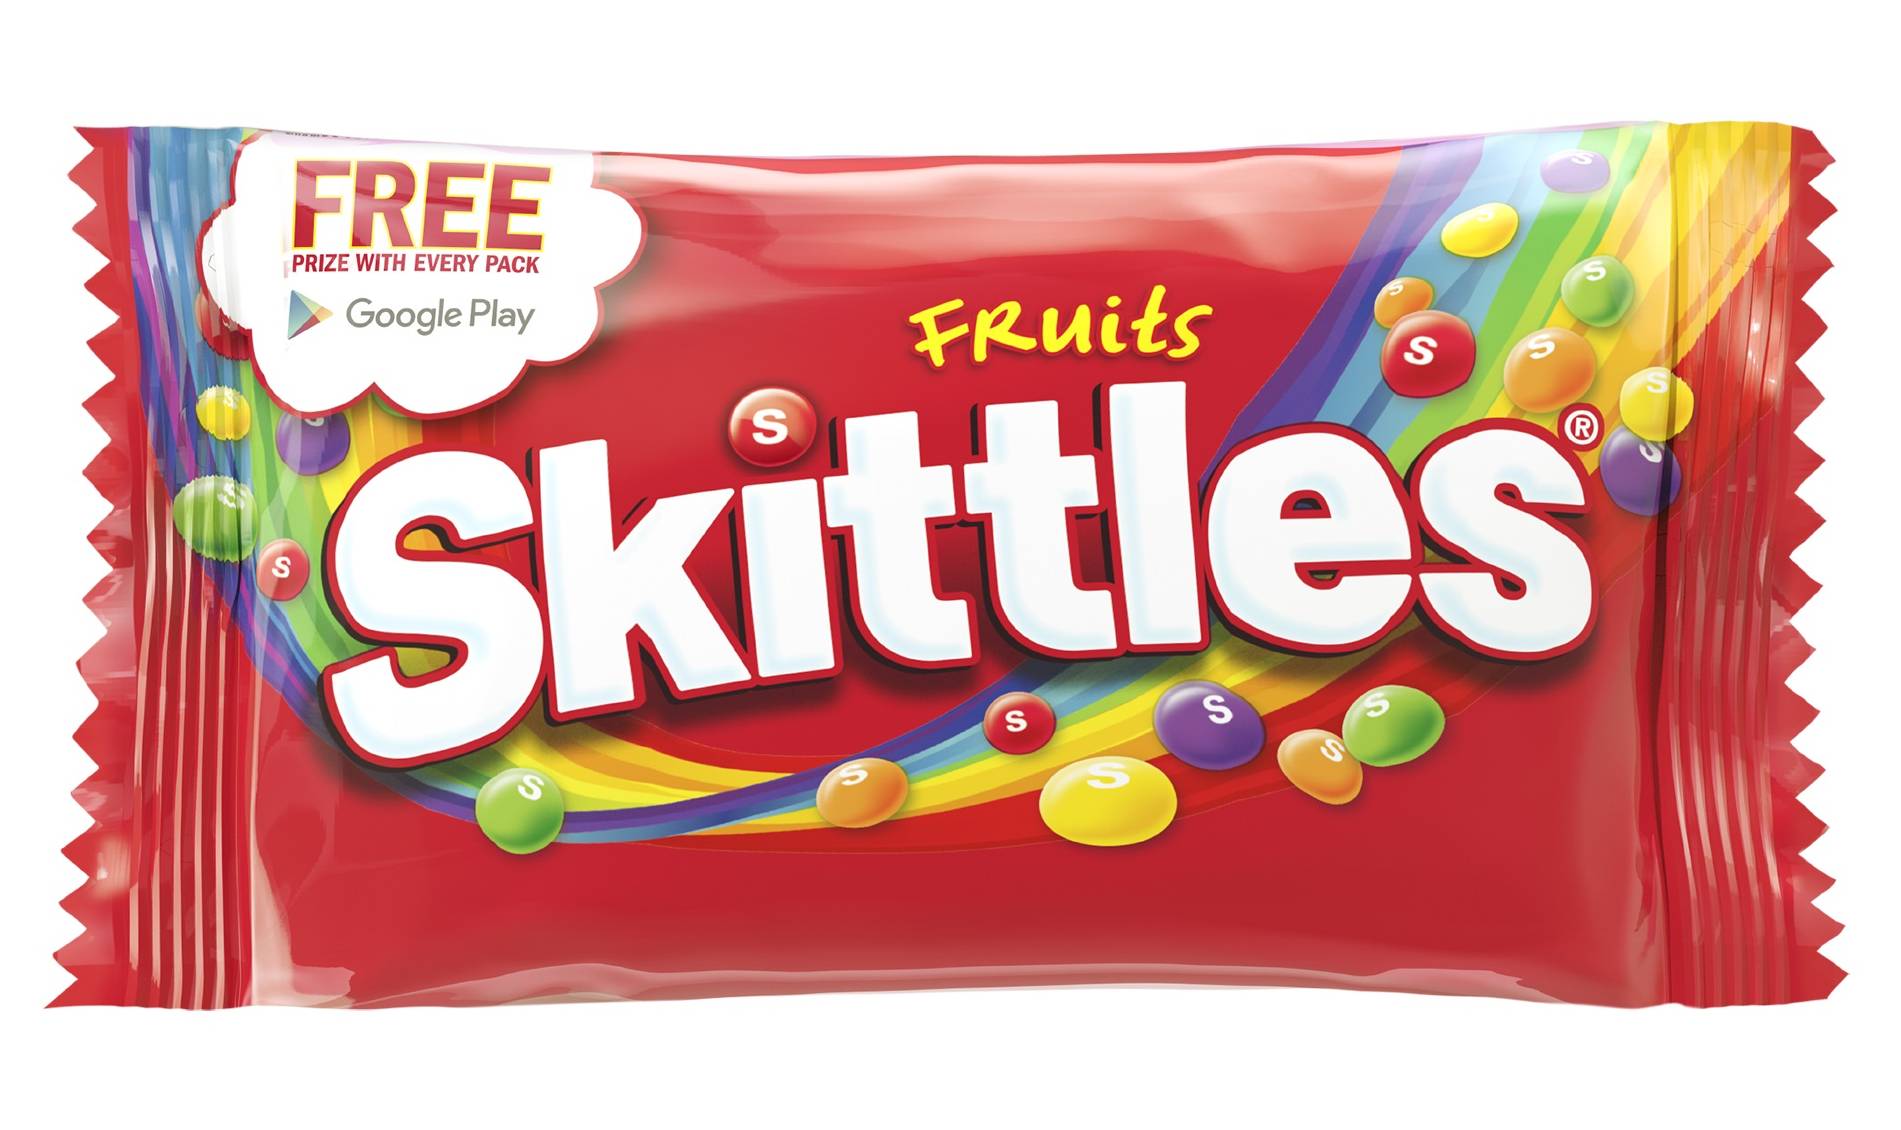 Skittles partners with Google Play.